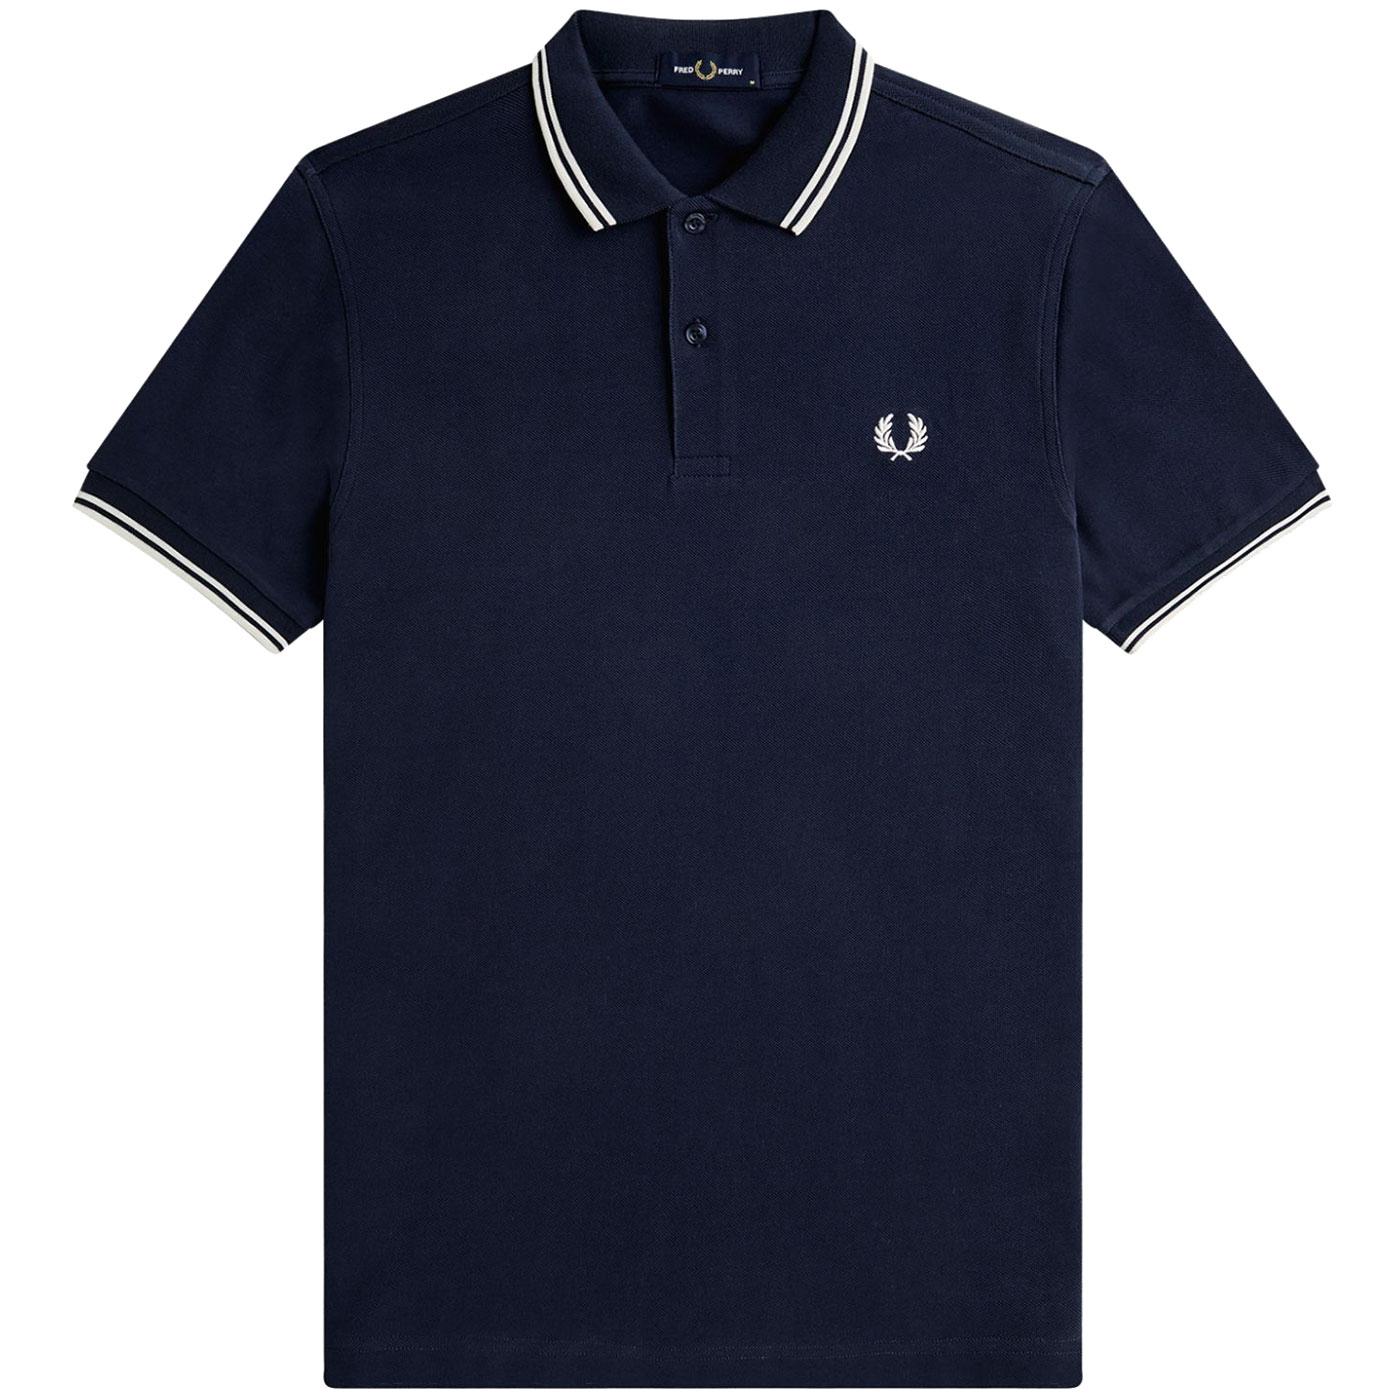 FRED PERRY M3600 Twin Tipped Mod Polo Shirt AF/E